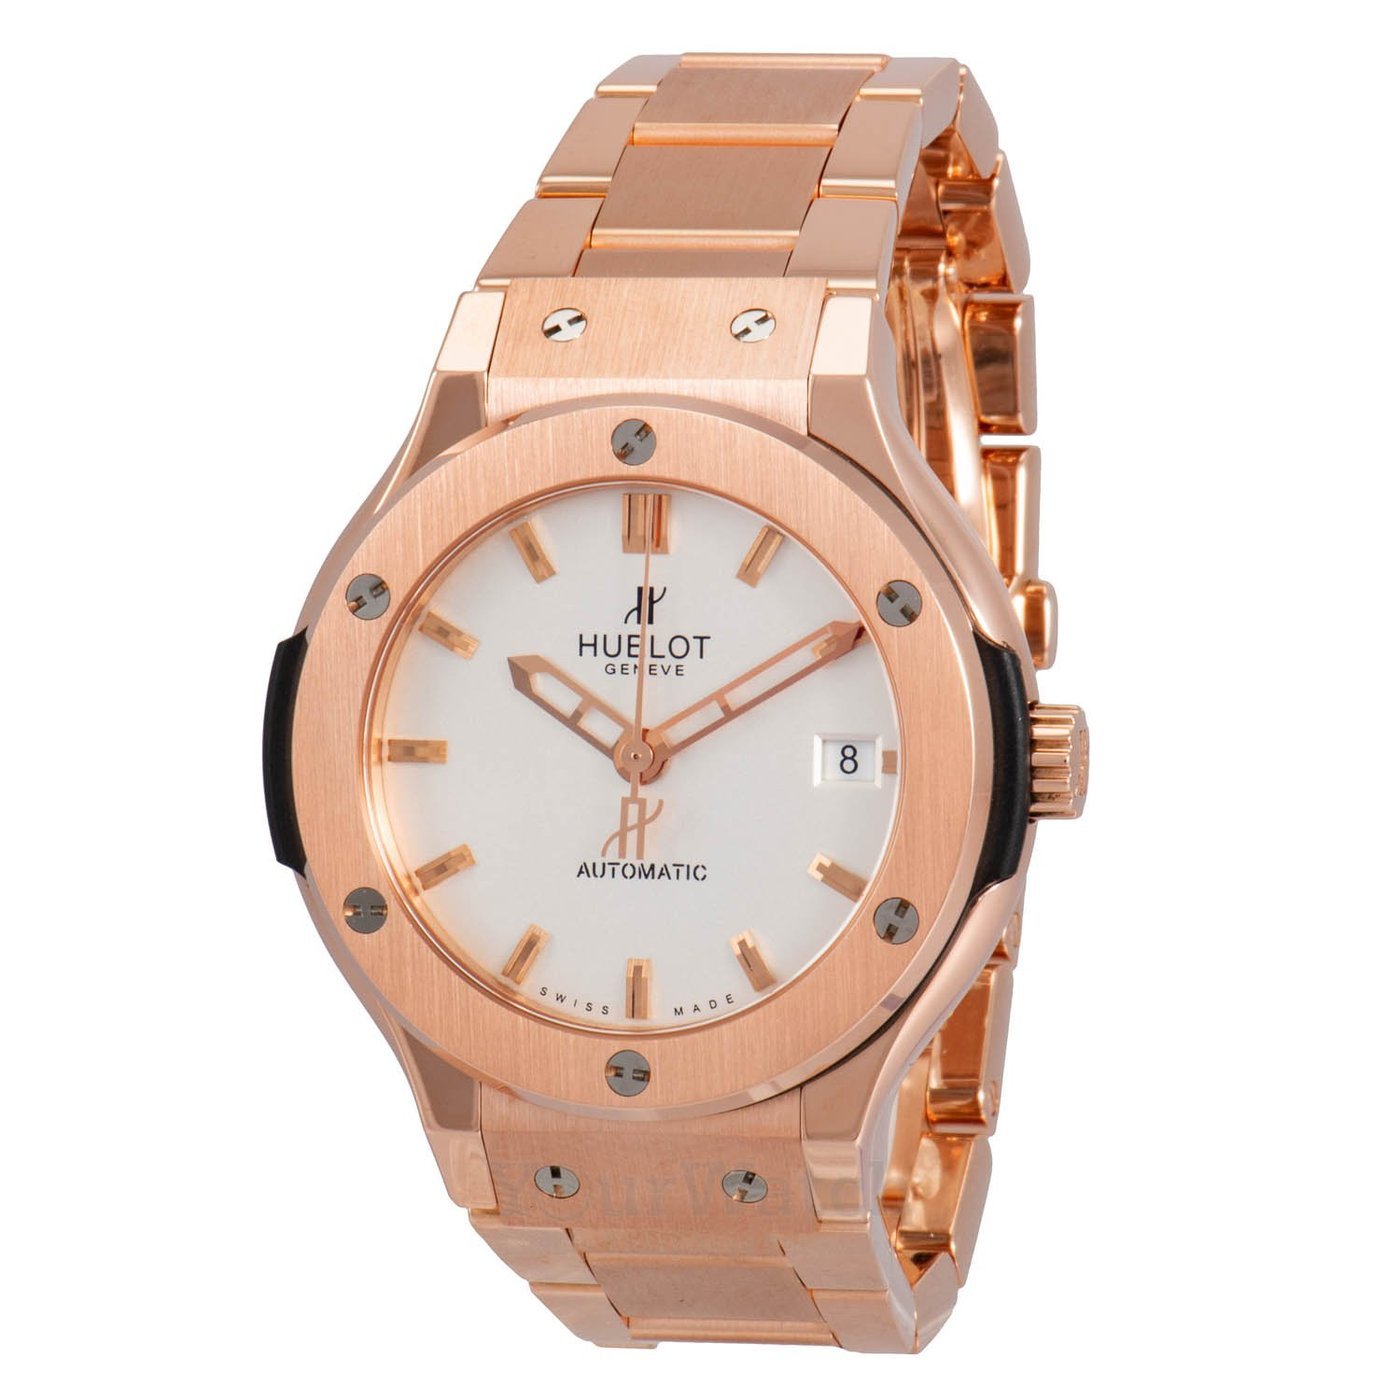 Hublot-Classic-Fusion-Automatic-38mm-Mens-Watch-565ox2610ox-Yourwatch